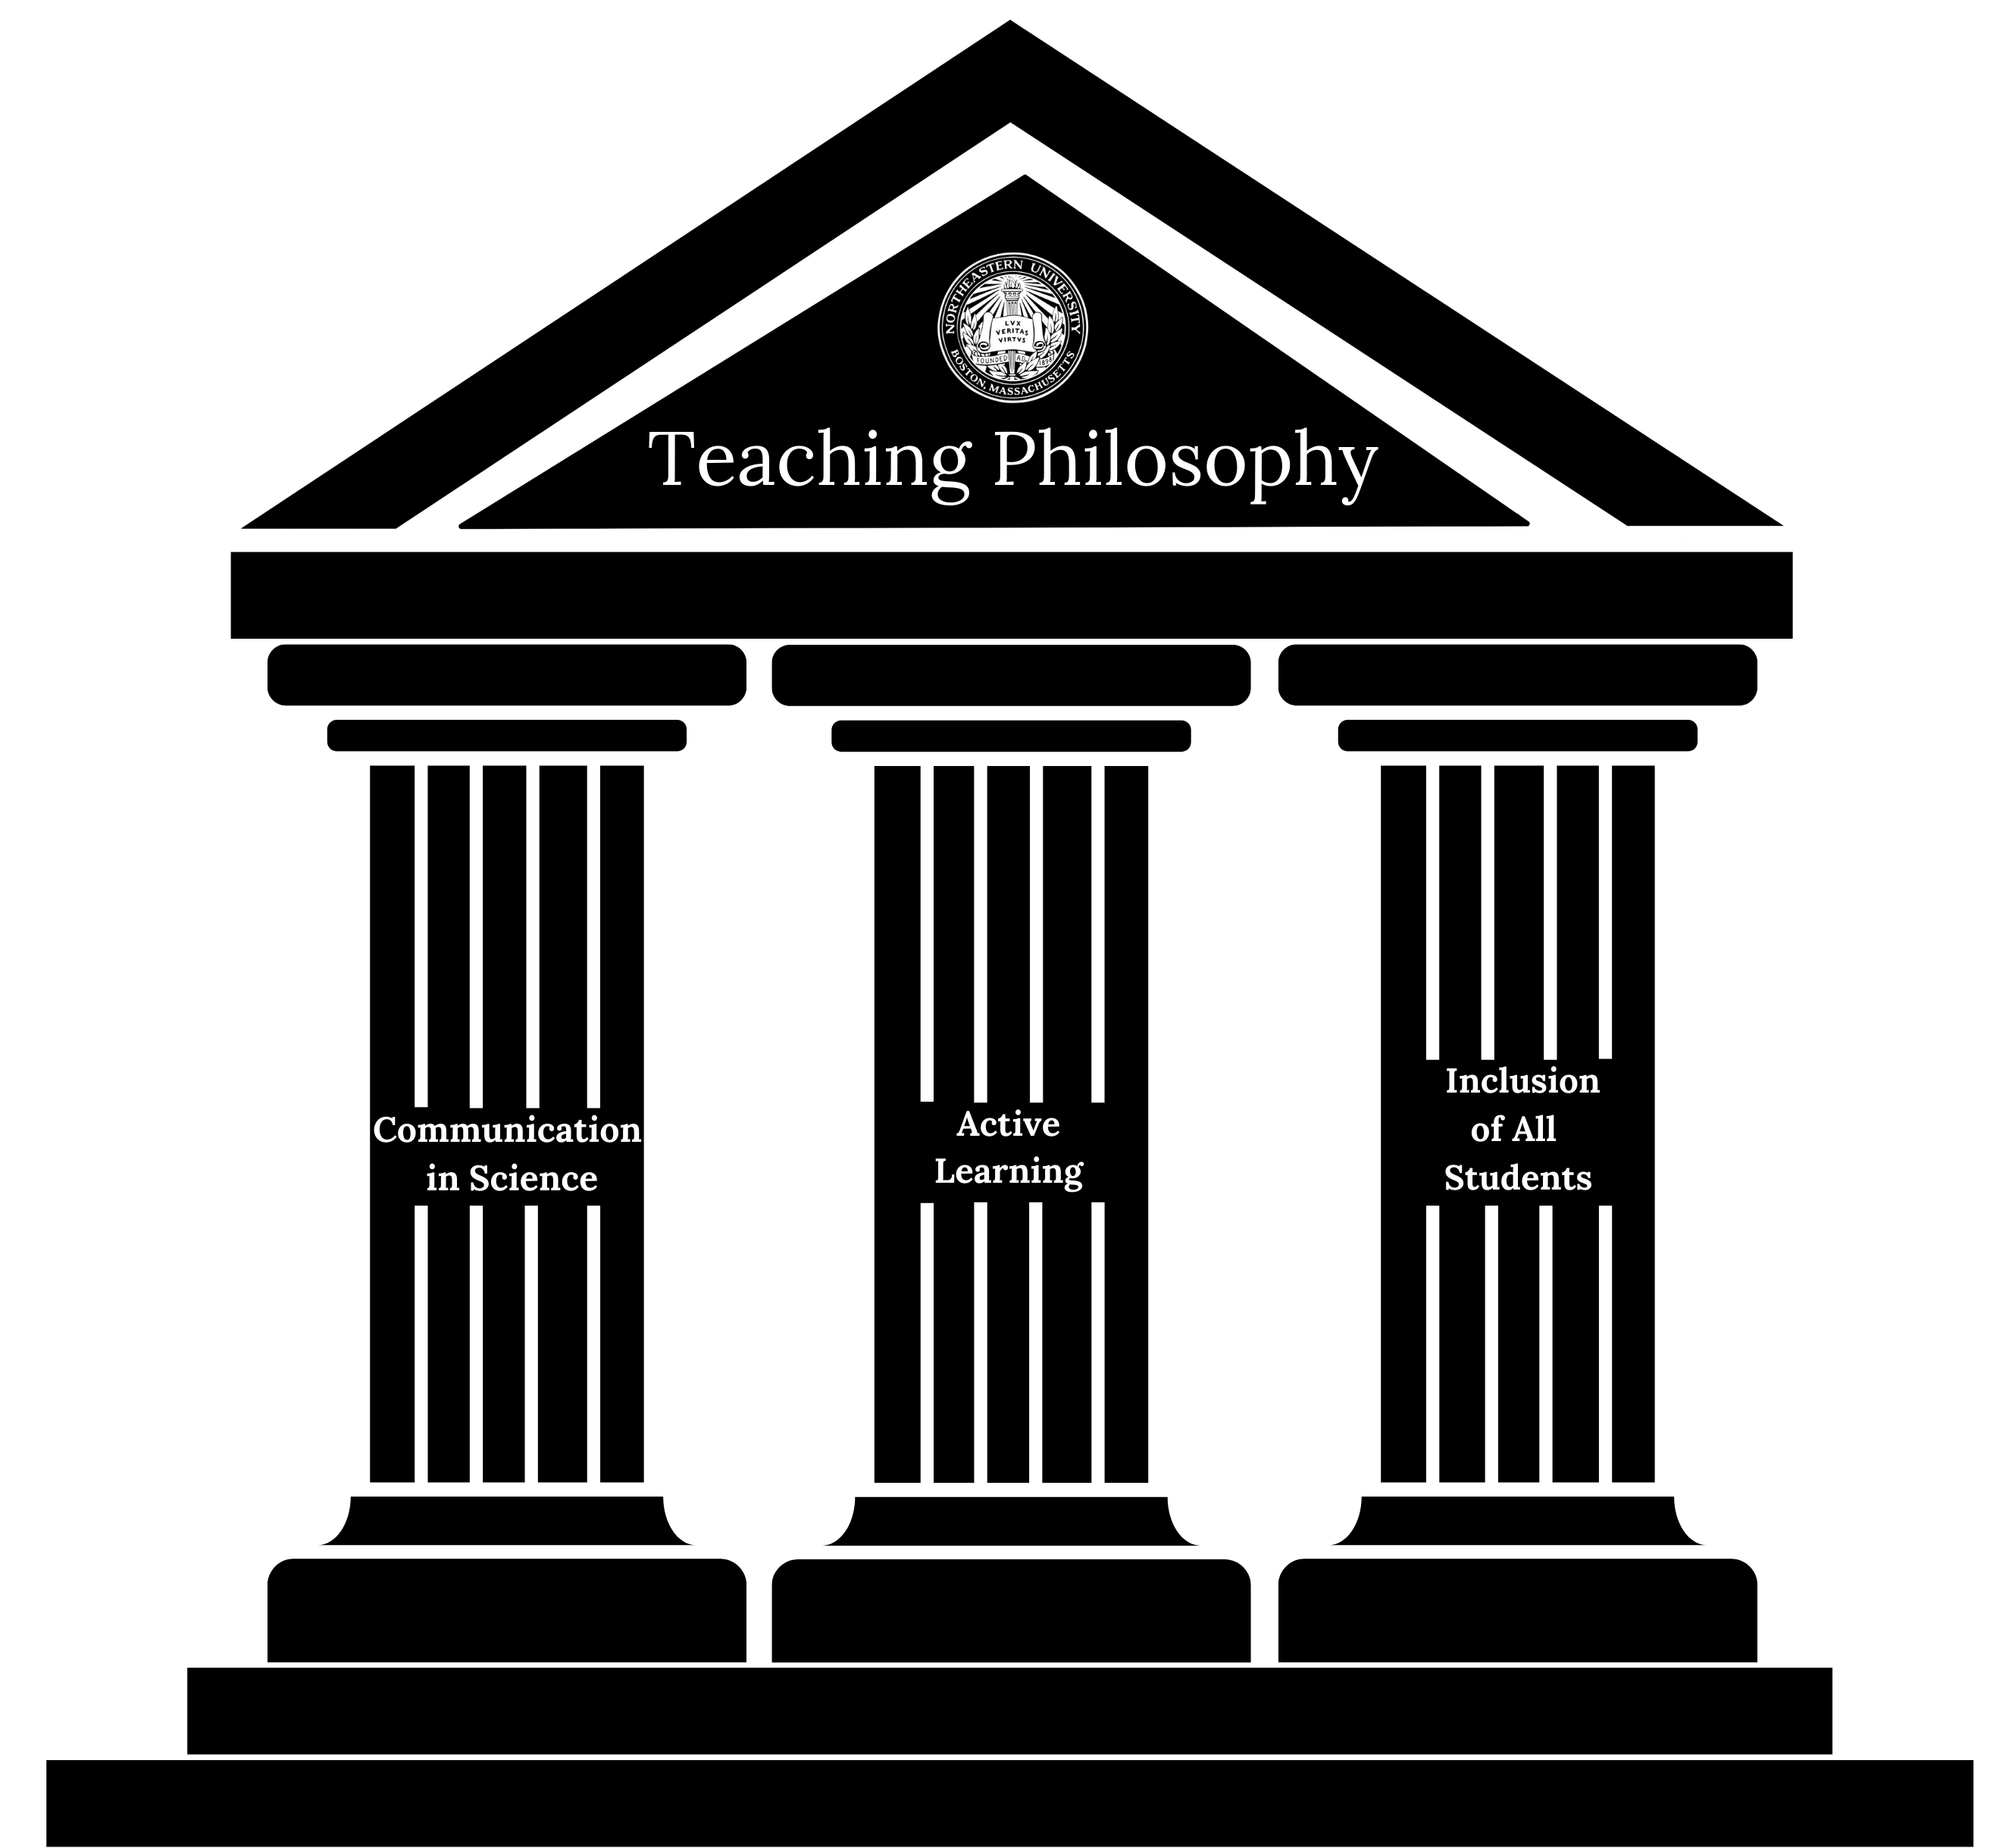 A black and white pantheon with three pillars holding up a roof. The roof is a triangle with the northeastern seal in it. In white letters it reads, “Teaching philosophy”. On each of the three pillars it reads a different phrase in white letters. From left to right it reads,” Communication in Science, Active Learning, and Inclusion of All Students.” On either side of the Pantheon are black and white leafy vines sprouting out of the top and bottom of the image.